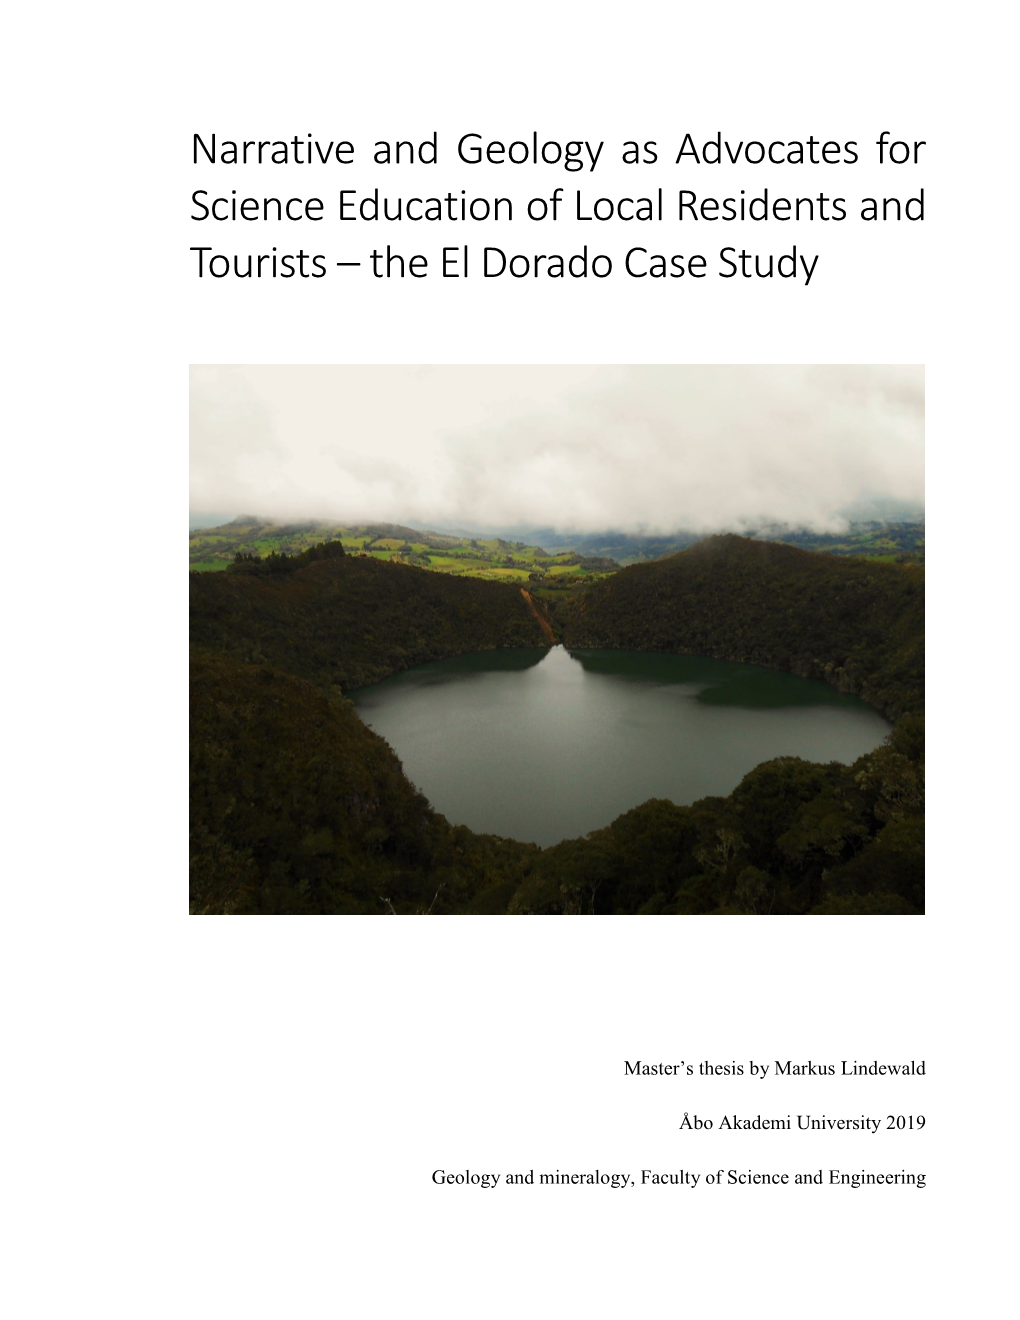 Narrative and Geology As Advocates for Science Education of Local Residents and Tourists – the El Dorado Case Study